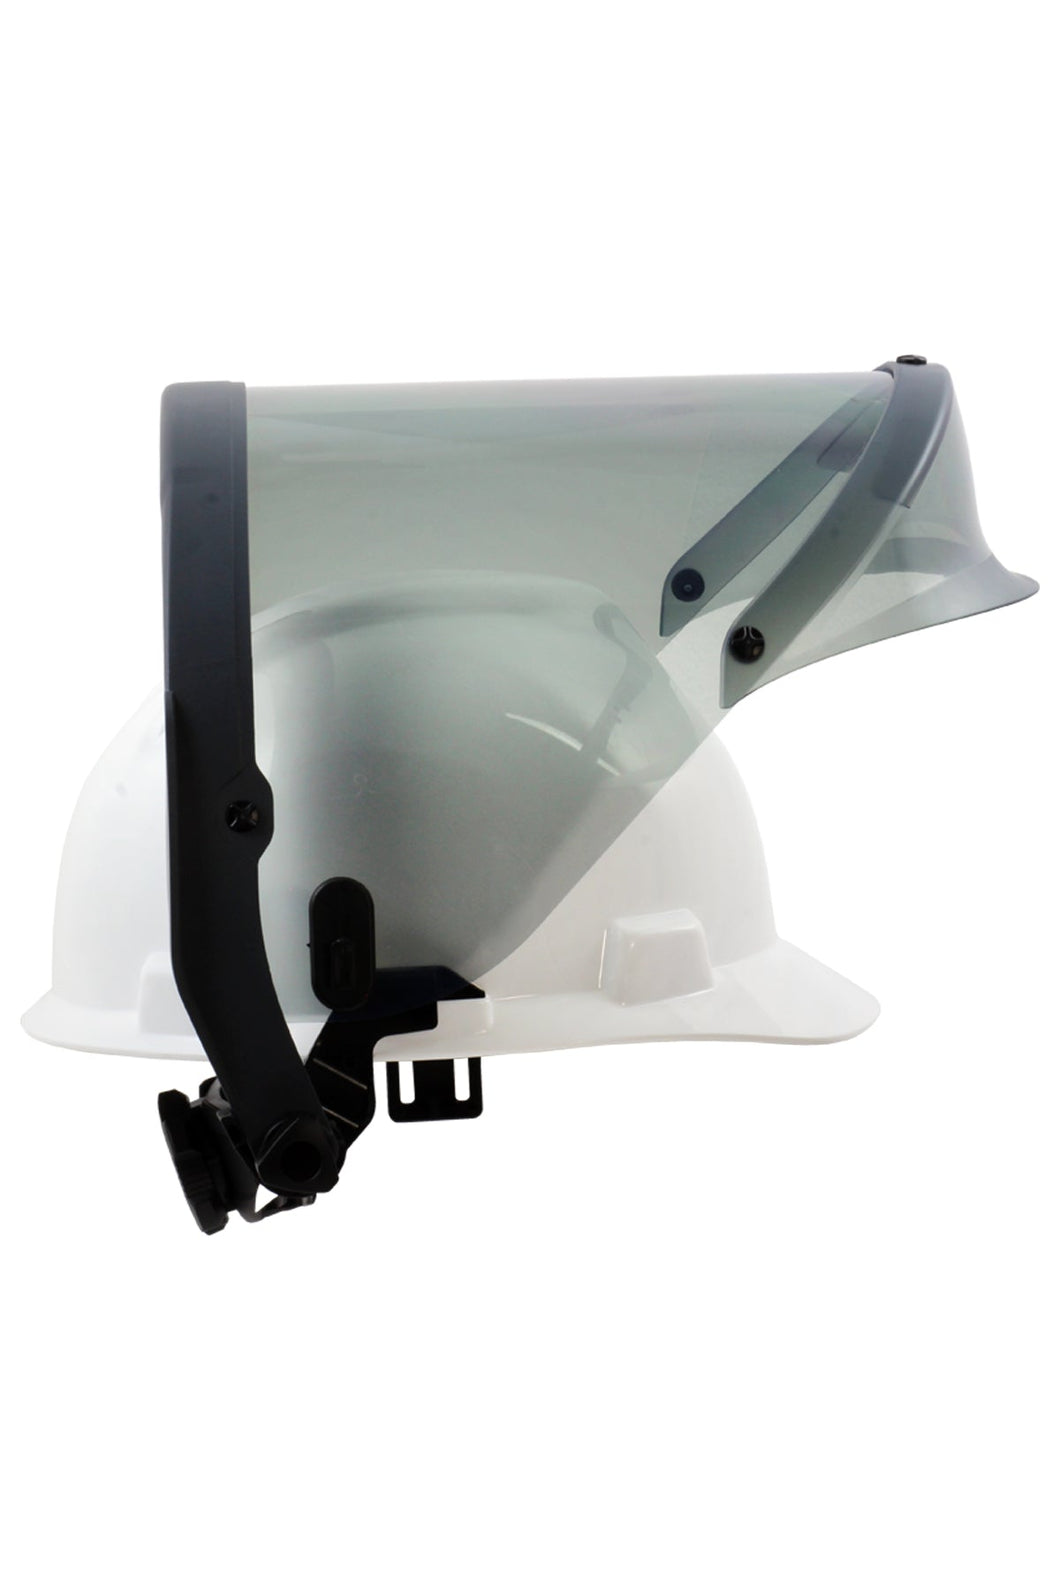 12 CAL Enespro Face Shield with Slotted Bracket and Hard Hat